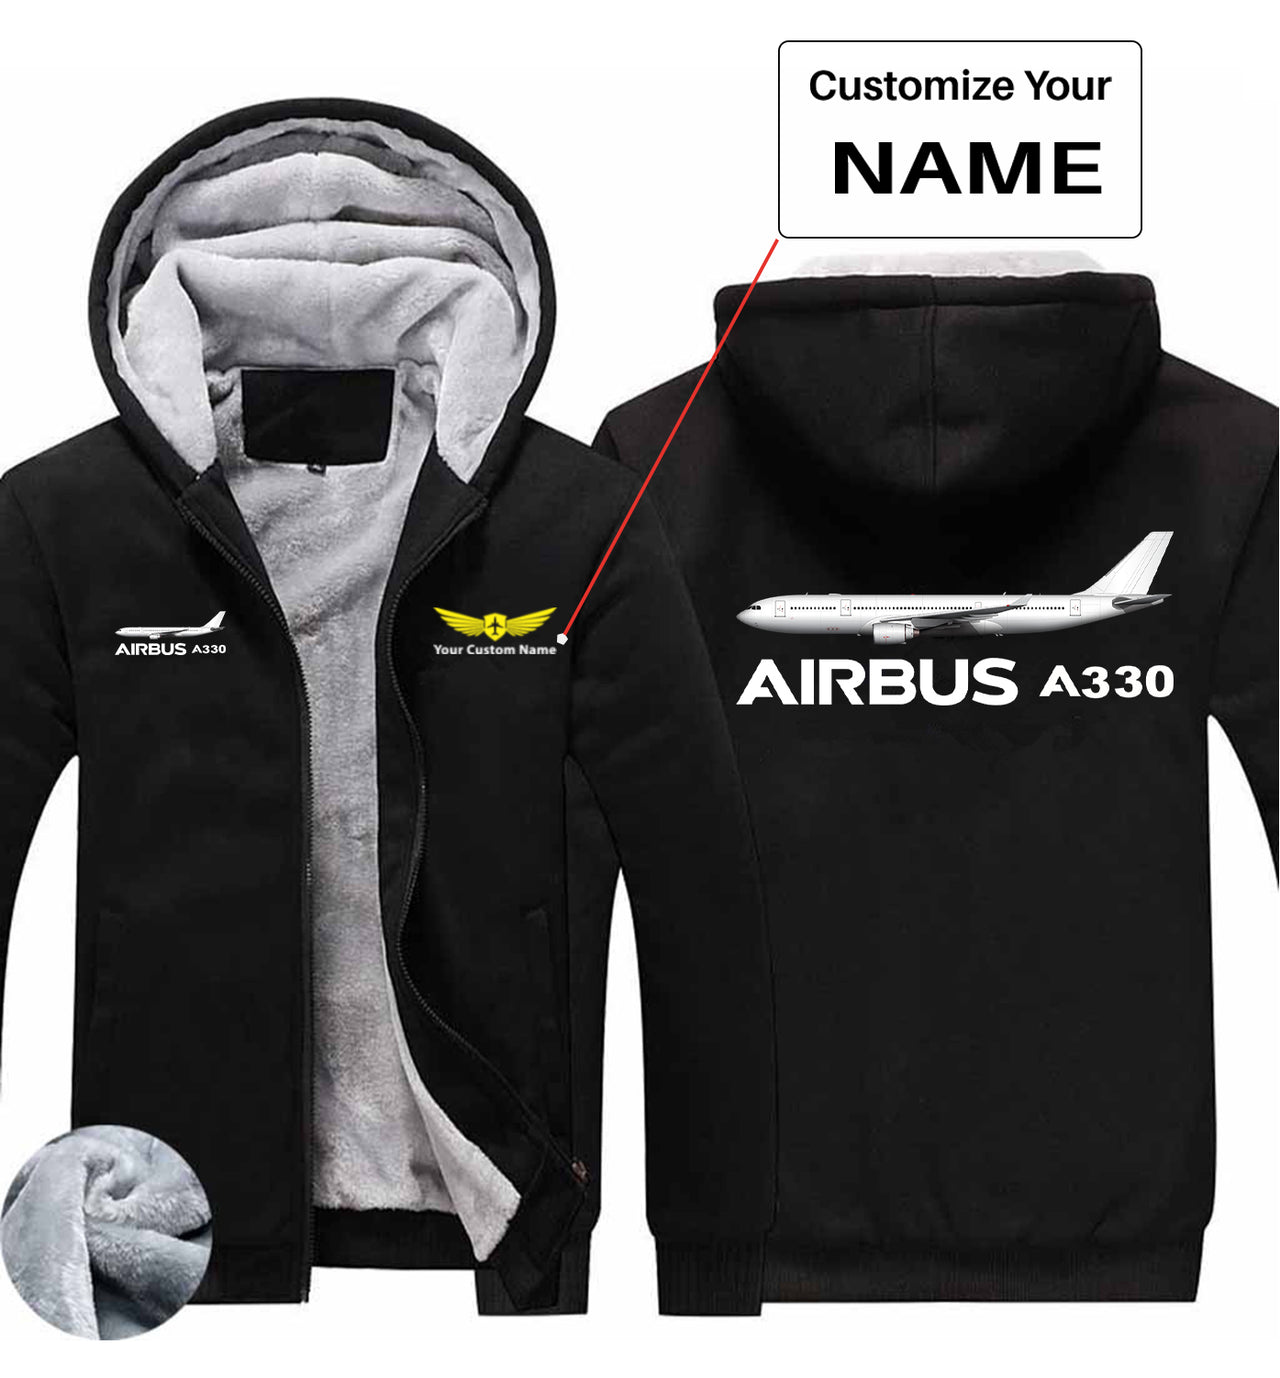 The Airbus A330 Designed Zipped Sweatshirts